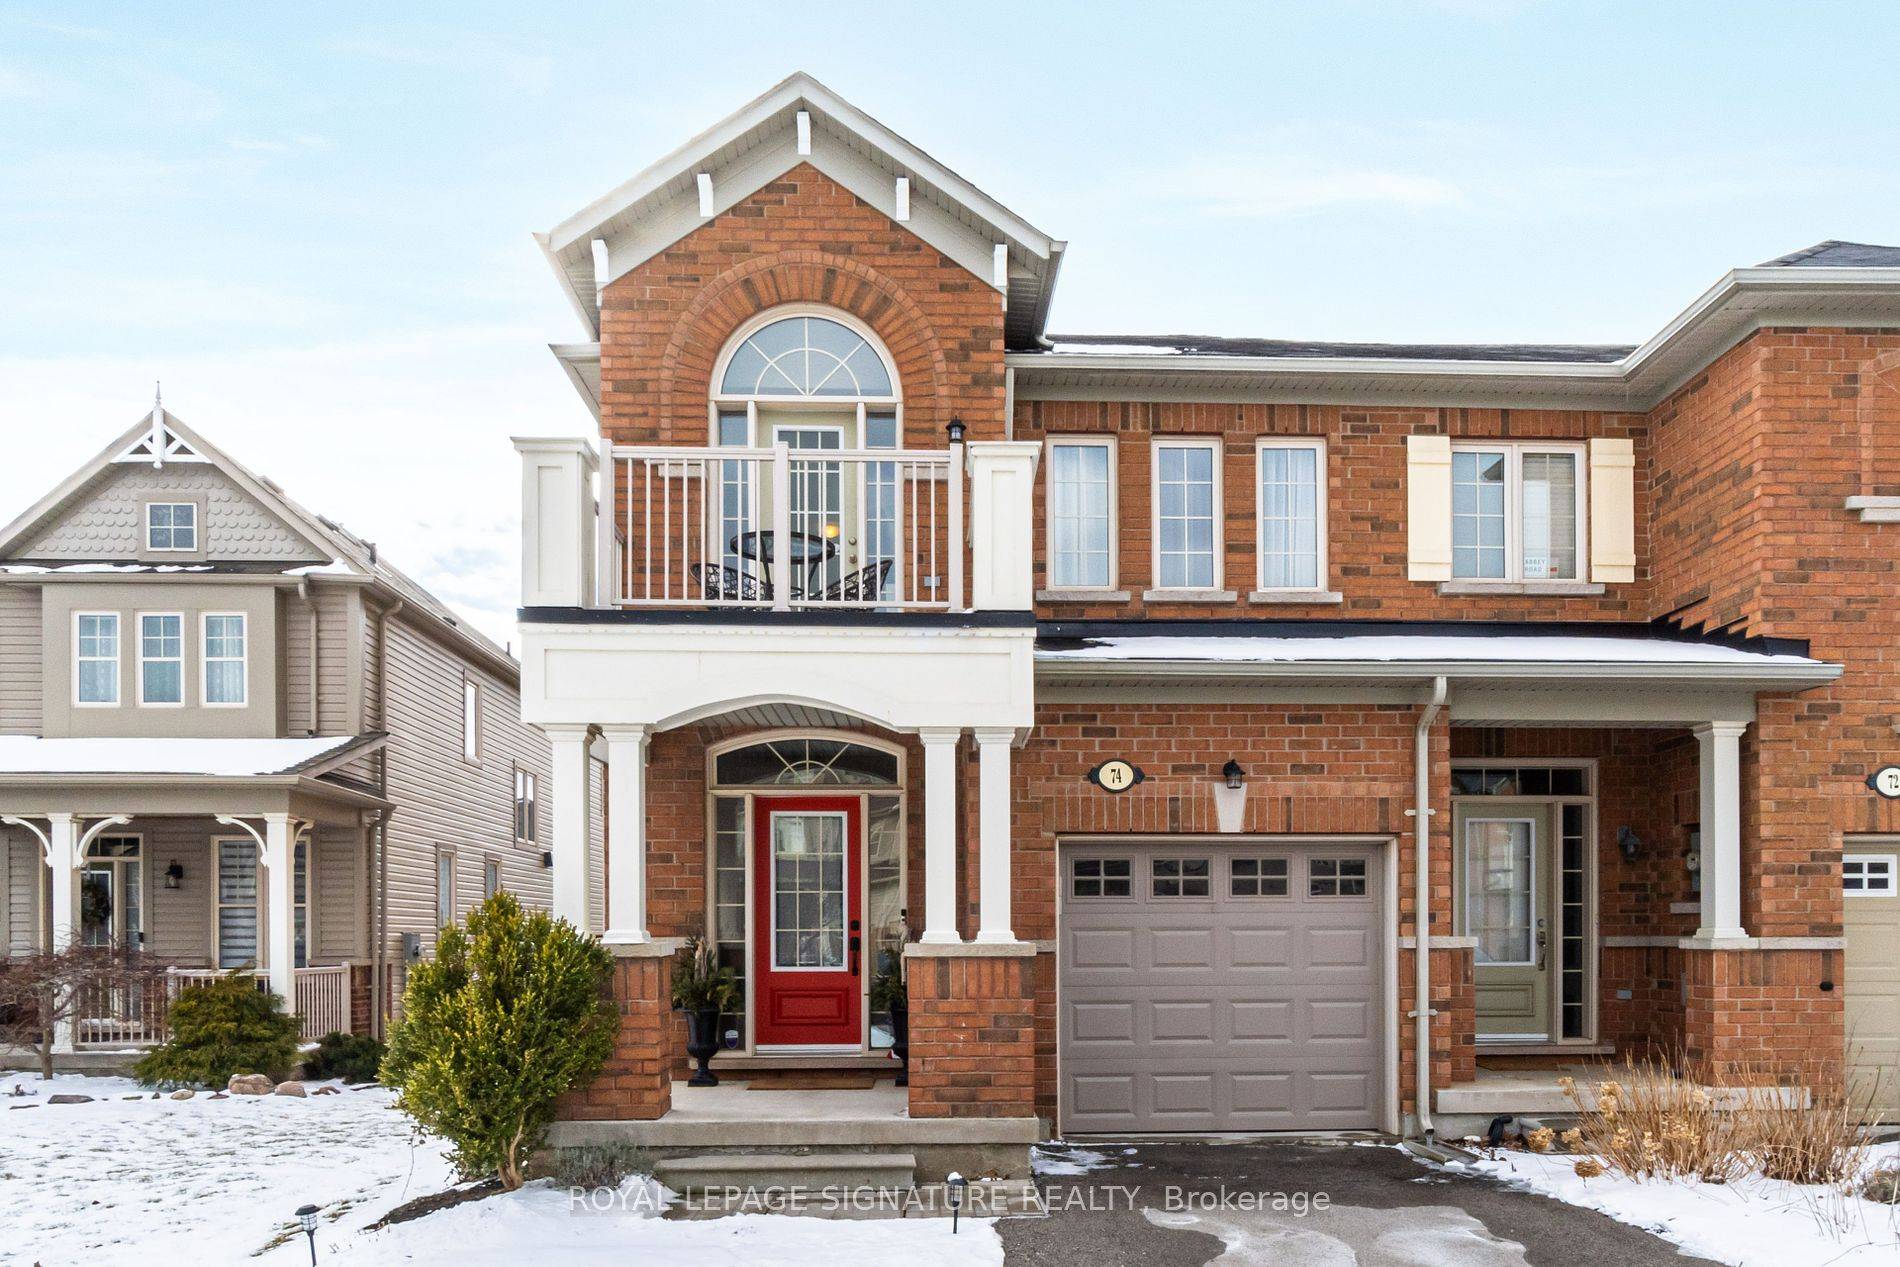 Stunning end unit TH in sought after waterdown west cul de sac.